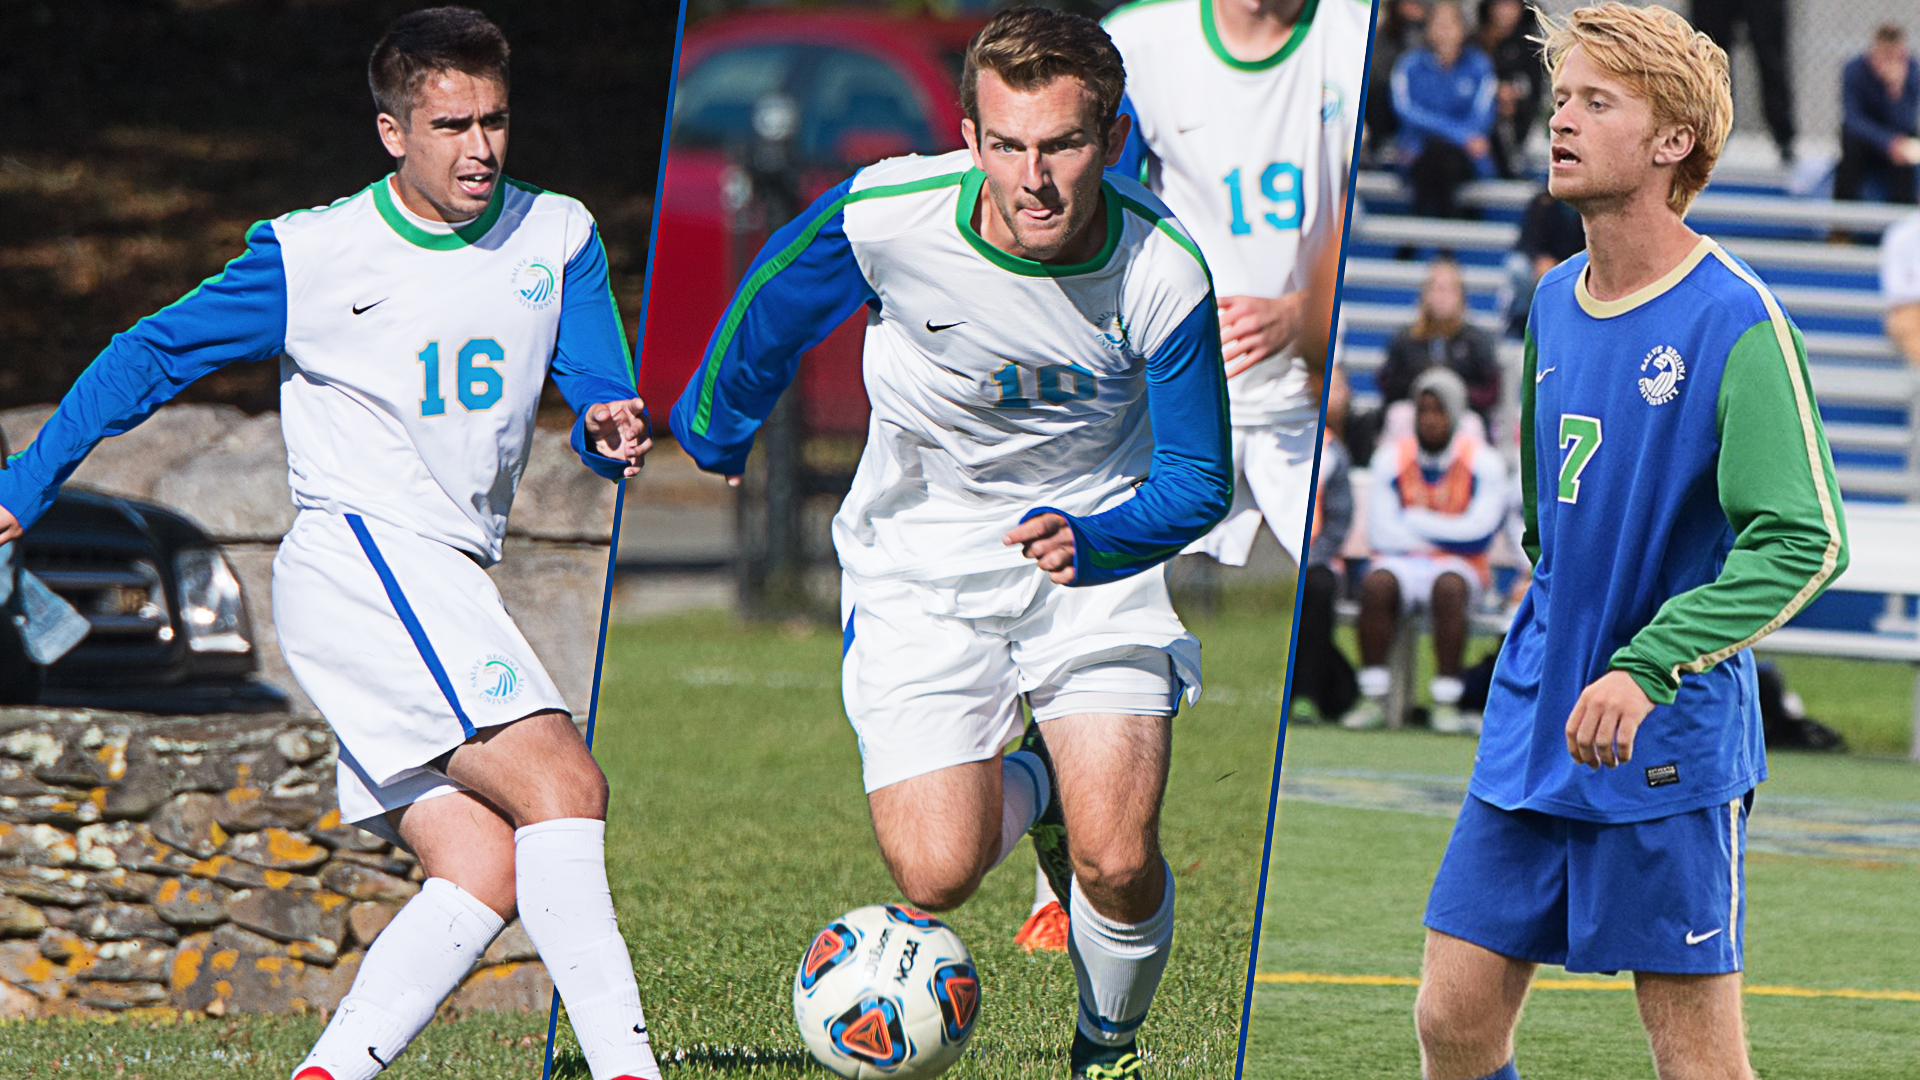 Noah Medeiros, Matthew O’Donnell, and Richard Leister (l-r) have been named Captains of the men's soccer team for the 2018 season.